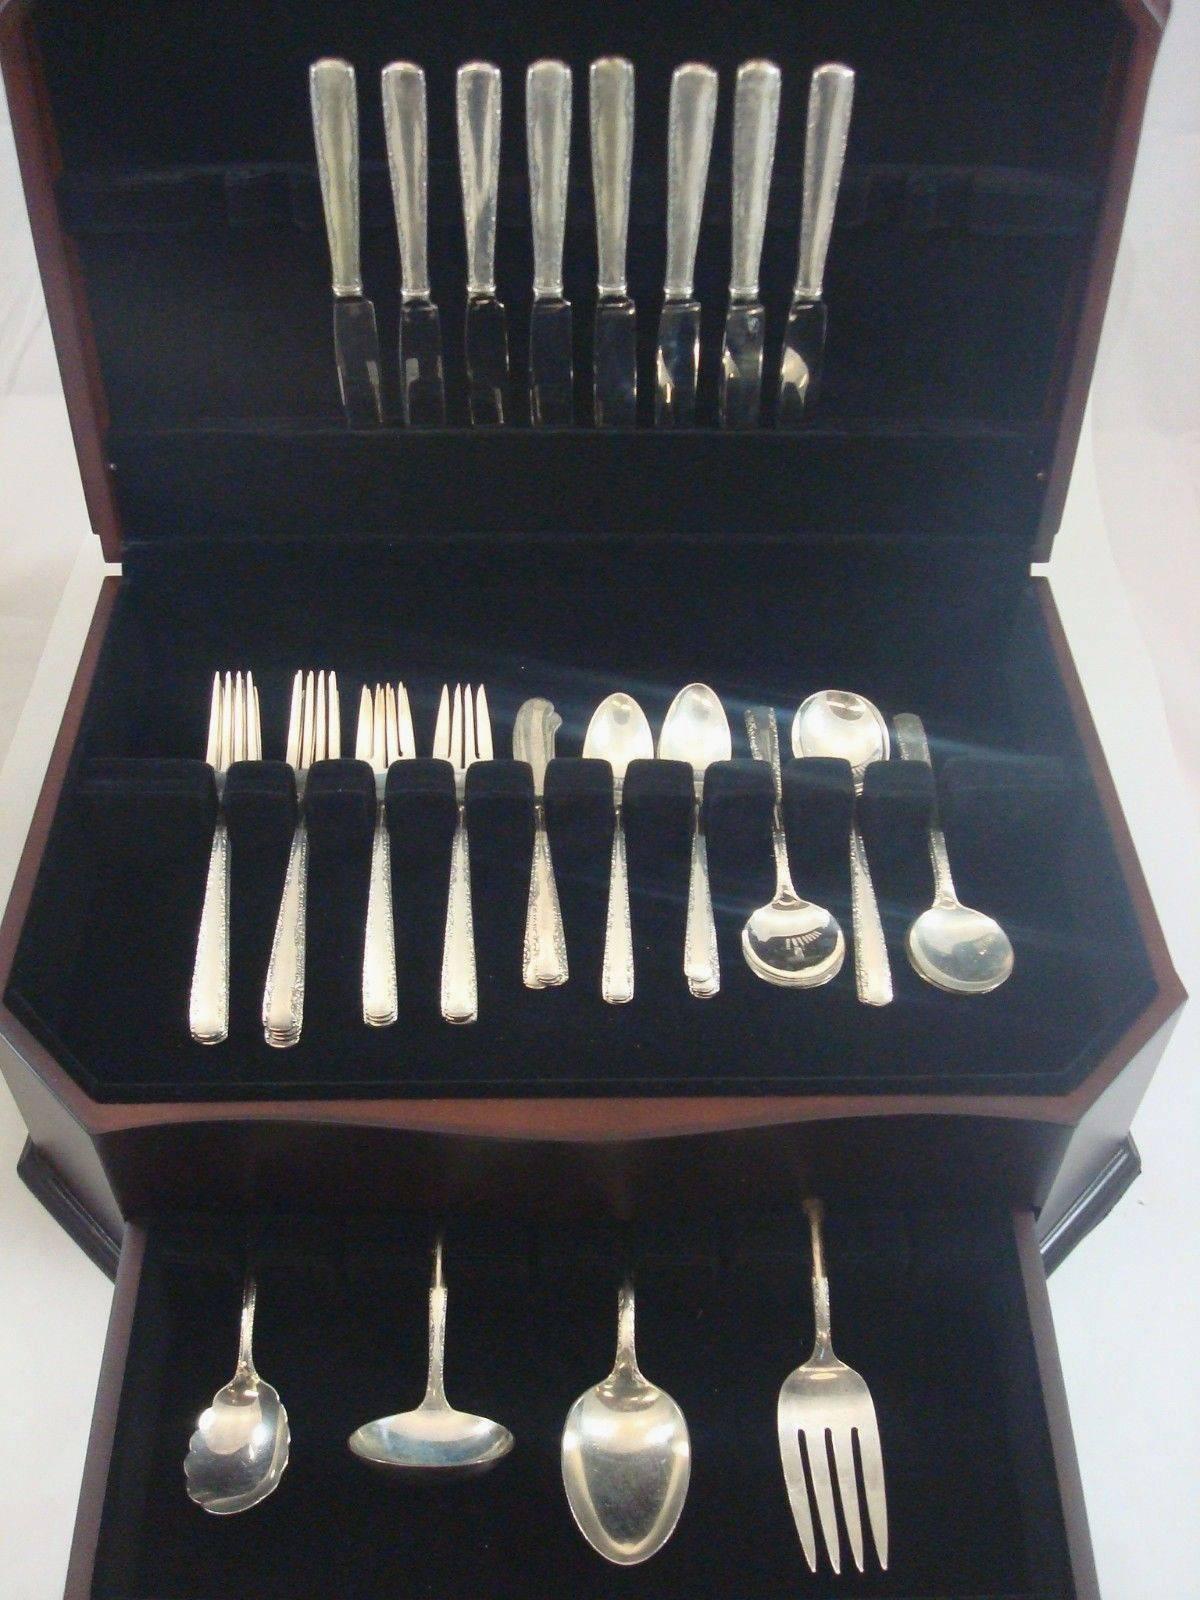 Camellia by Gorham sterling silver flatware set of 52 Pieces. This set includes: 

Eight knives, 8 3/4